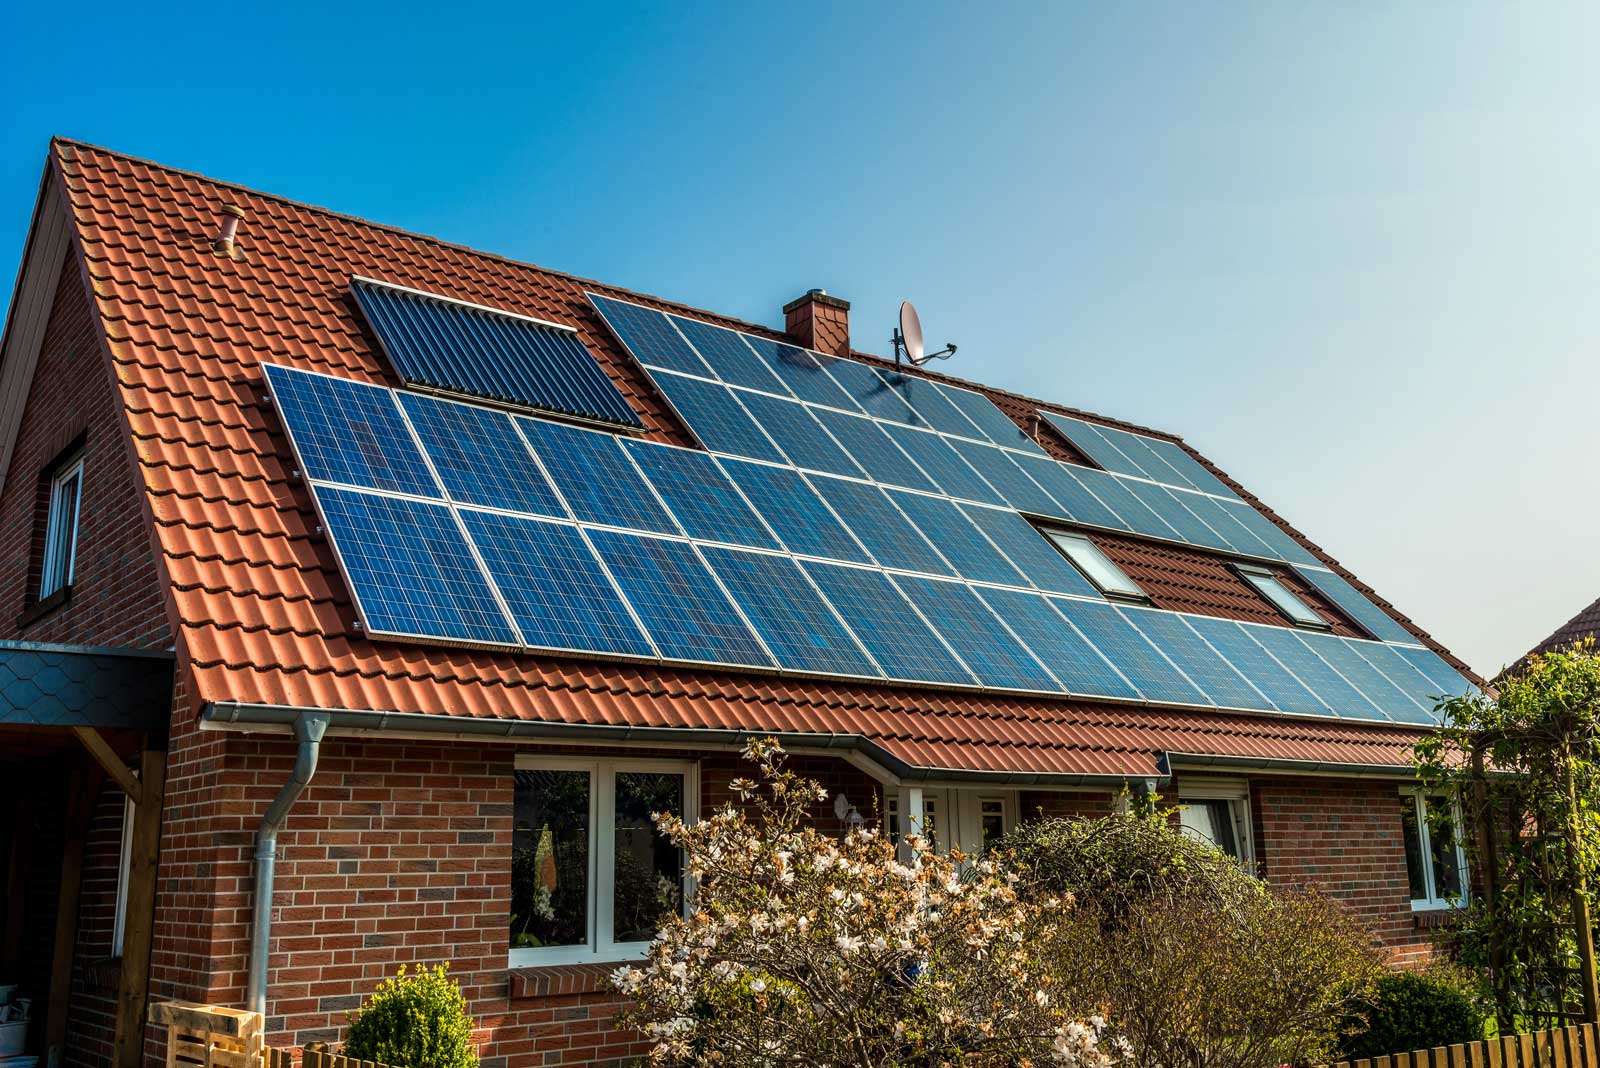 How solar panels help the environment